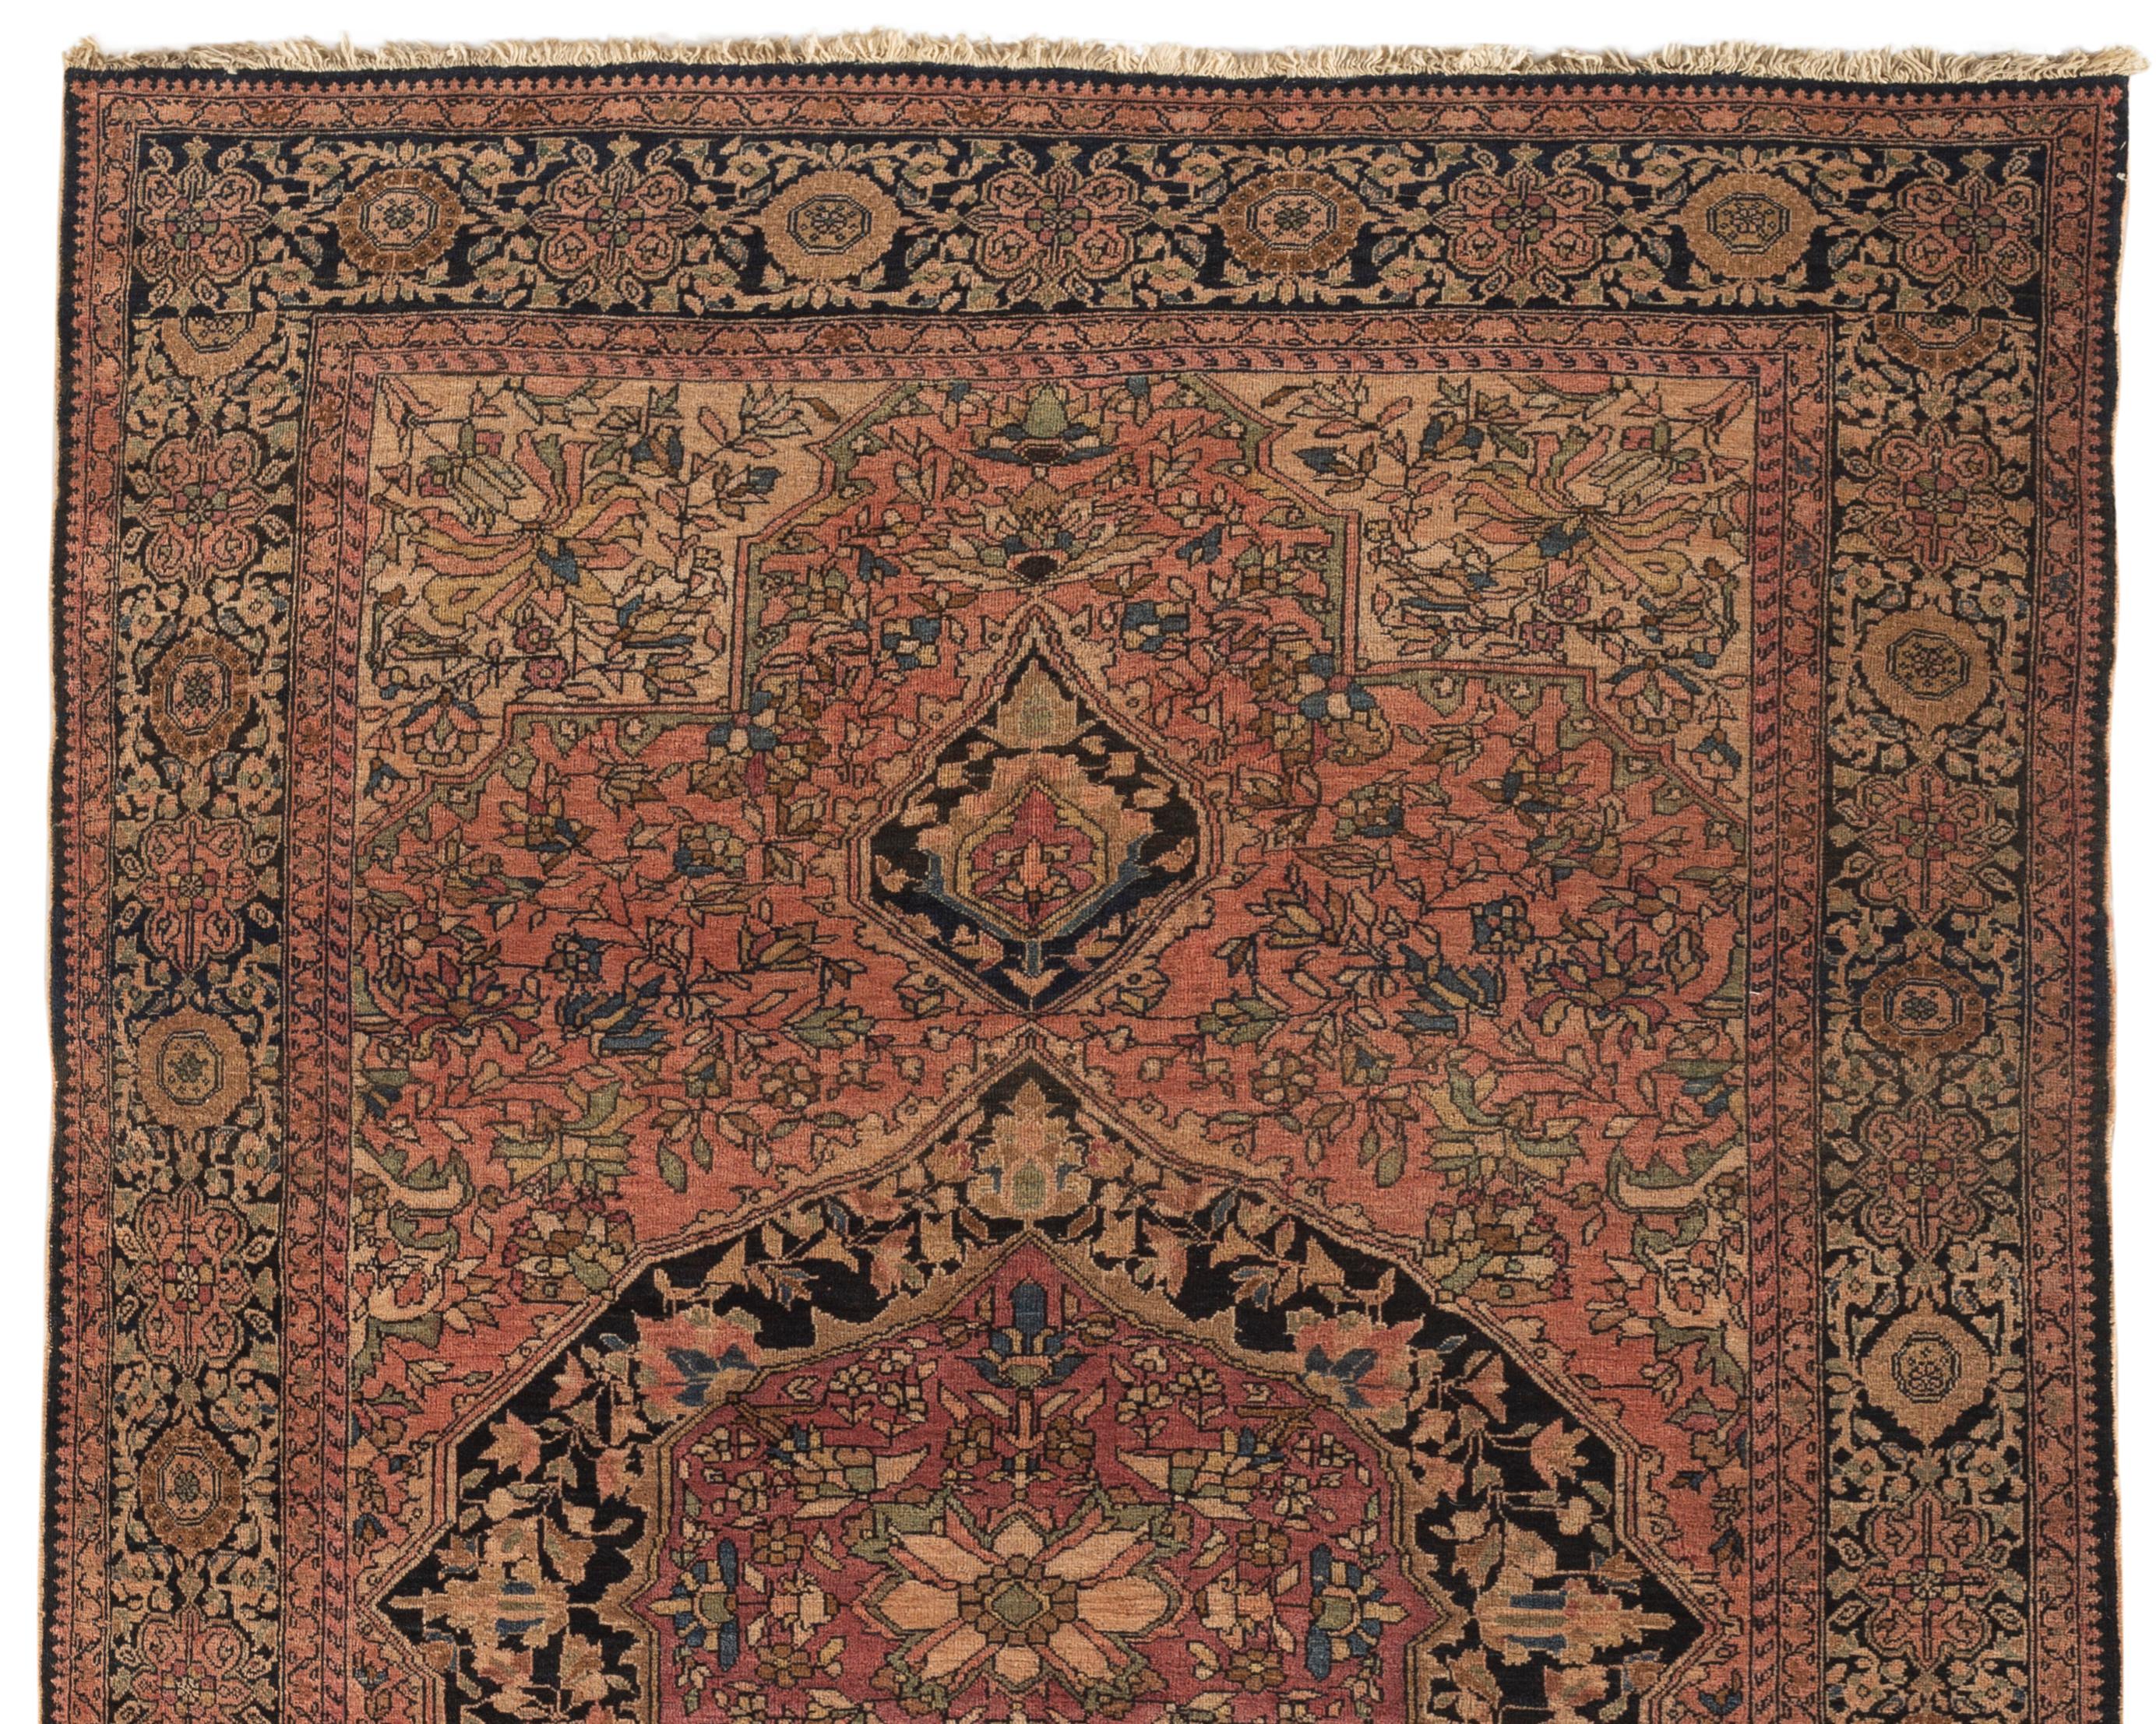 Antique Persian Farahan Sarouk rug, circa 1880. Sarouk rugs come from west central Persia. A delightful small scatter rug with a central design surrounded by floral motifs with four soft ivory spandrels enclosed within a border repeating the floral